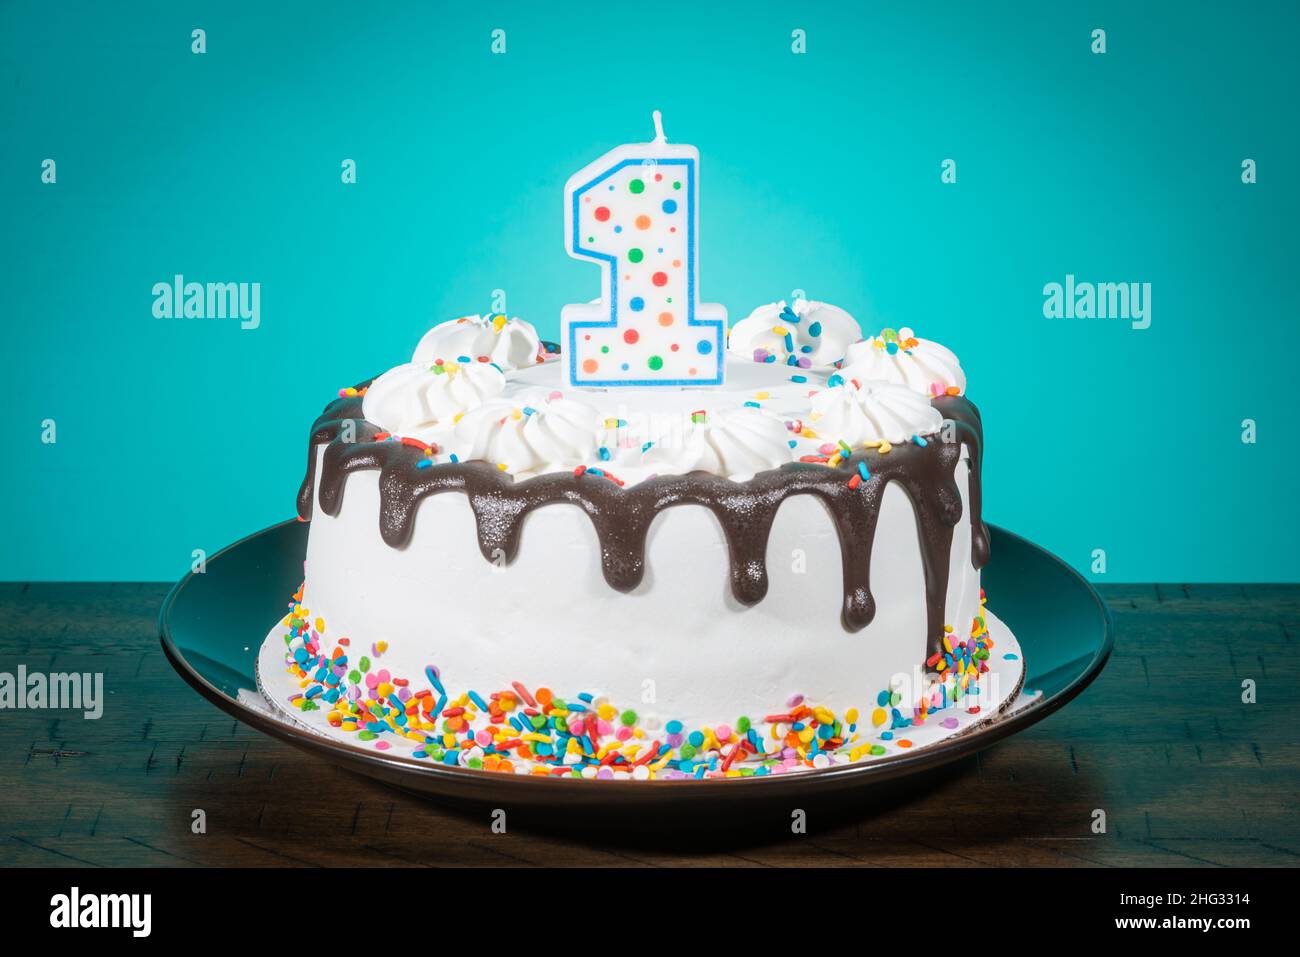 A birthday cake bears a candle in the shape of the number 1. Stock Photo